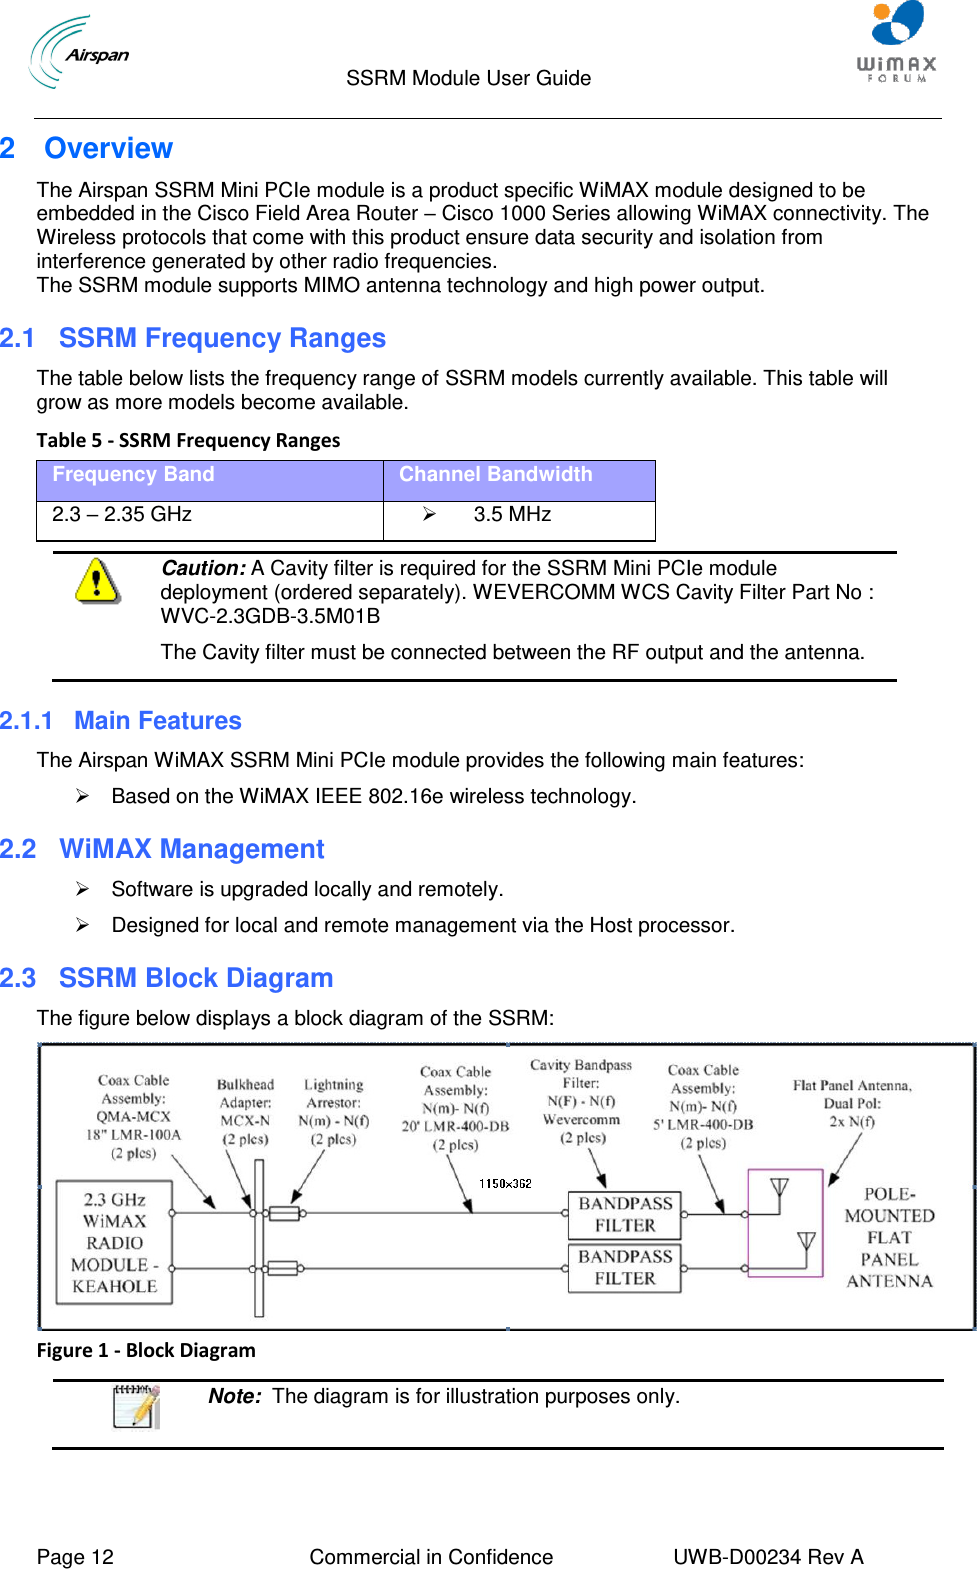                                  SSRM Module User Guide     Page 12  Commercial in Confidence  UWB-D00234 Rev A    2  Overview The Airspan SSRM Mini PCIe module is a product specific WiMAX module designed to be embedded in the Cisco Field Area Router  Cisco 1000 Series allowing WiMAX connectivity. The Wireless protocols that come with this product ensure data security and isolation from interference generated by other radio frequencies. The SSRM module supports MIMO antenna technology and high power output.  2.1 SSRM Frequency Ranges The table below lists the frequency range of SSRM models currently available. This table will grow as more models become available. Table 5 - SSRM Frequency Ranges Frequency Band Channel Bandwidth 2.3  2.35 GHz   3.5 MHz   Caution: A Cavity filter is required for the SSRM Mini PCIe module deployment (ordered separately). WEVERCOMM WCS Cavity Filter Part No : WVC-2.3GDB-3.5M01B The Cavity filter must be connected between the RF output and the antenna. 2.1.1  Main Features The Airspan WiMAX SSRM Mini PCIe module provides the following main features:   Based on the WiMAX IEEE 802.16e wireless technology. 2.2  WiMAX Management   Software is upgraded locally and remotely.   Designed for local and remote management via the Host processor. 2.3 SSRM Block Diagram The figure below displays a block diagram of the SSRM:  Figure 1 - Block Diagram   Note:  The diagram is for illustration purposes only.  